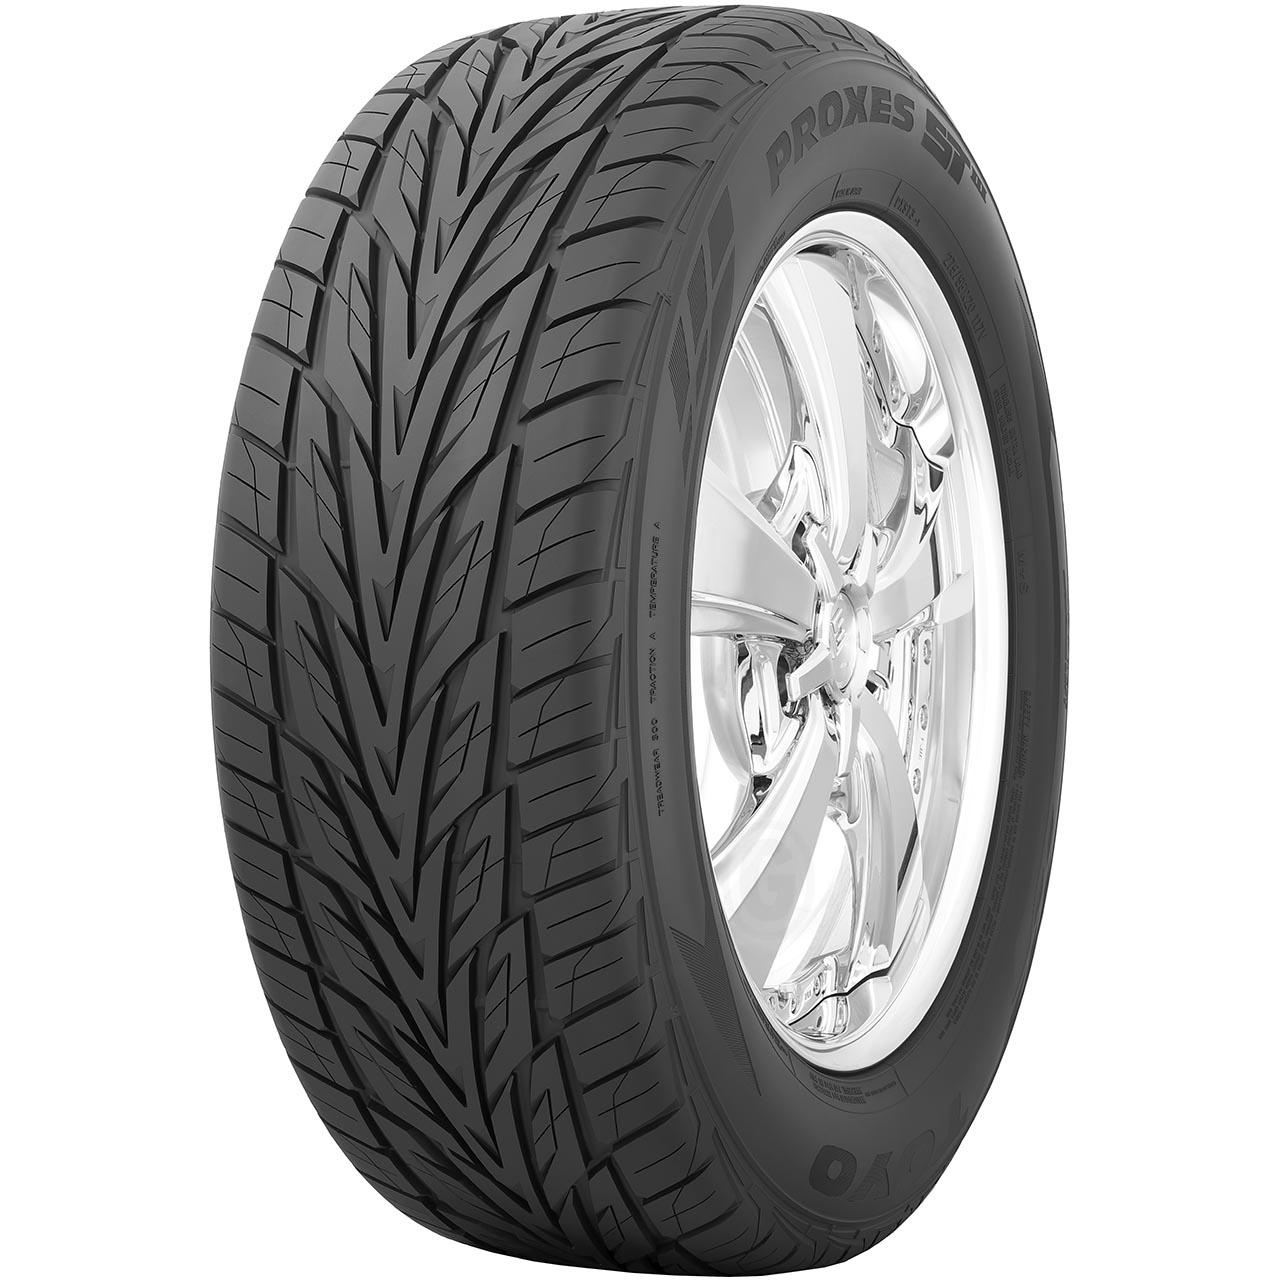 TOYO PROXES S/T III 245/60R18 105V